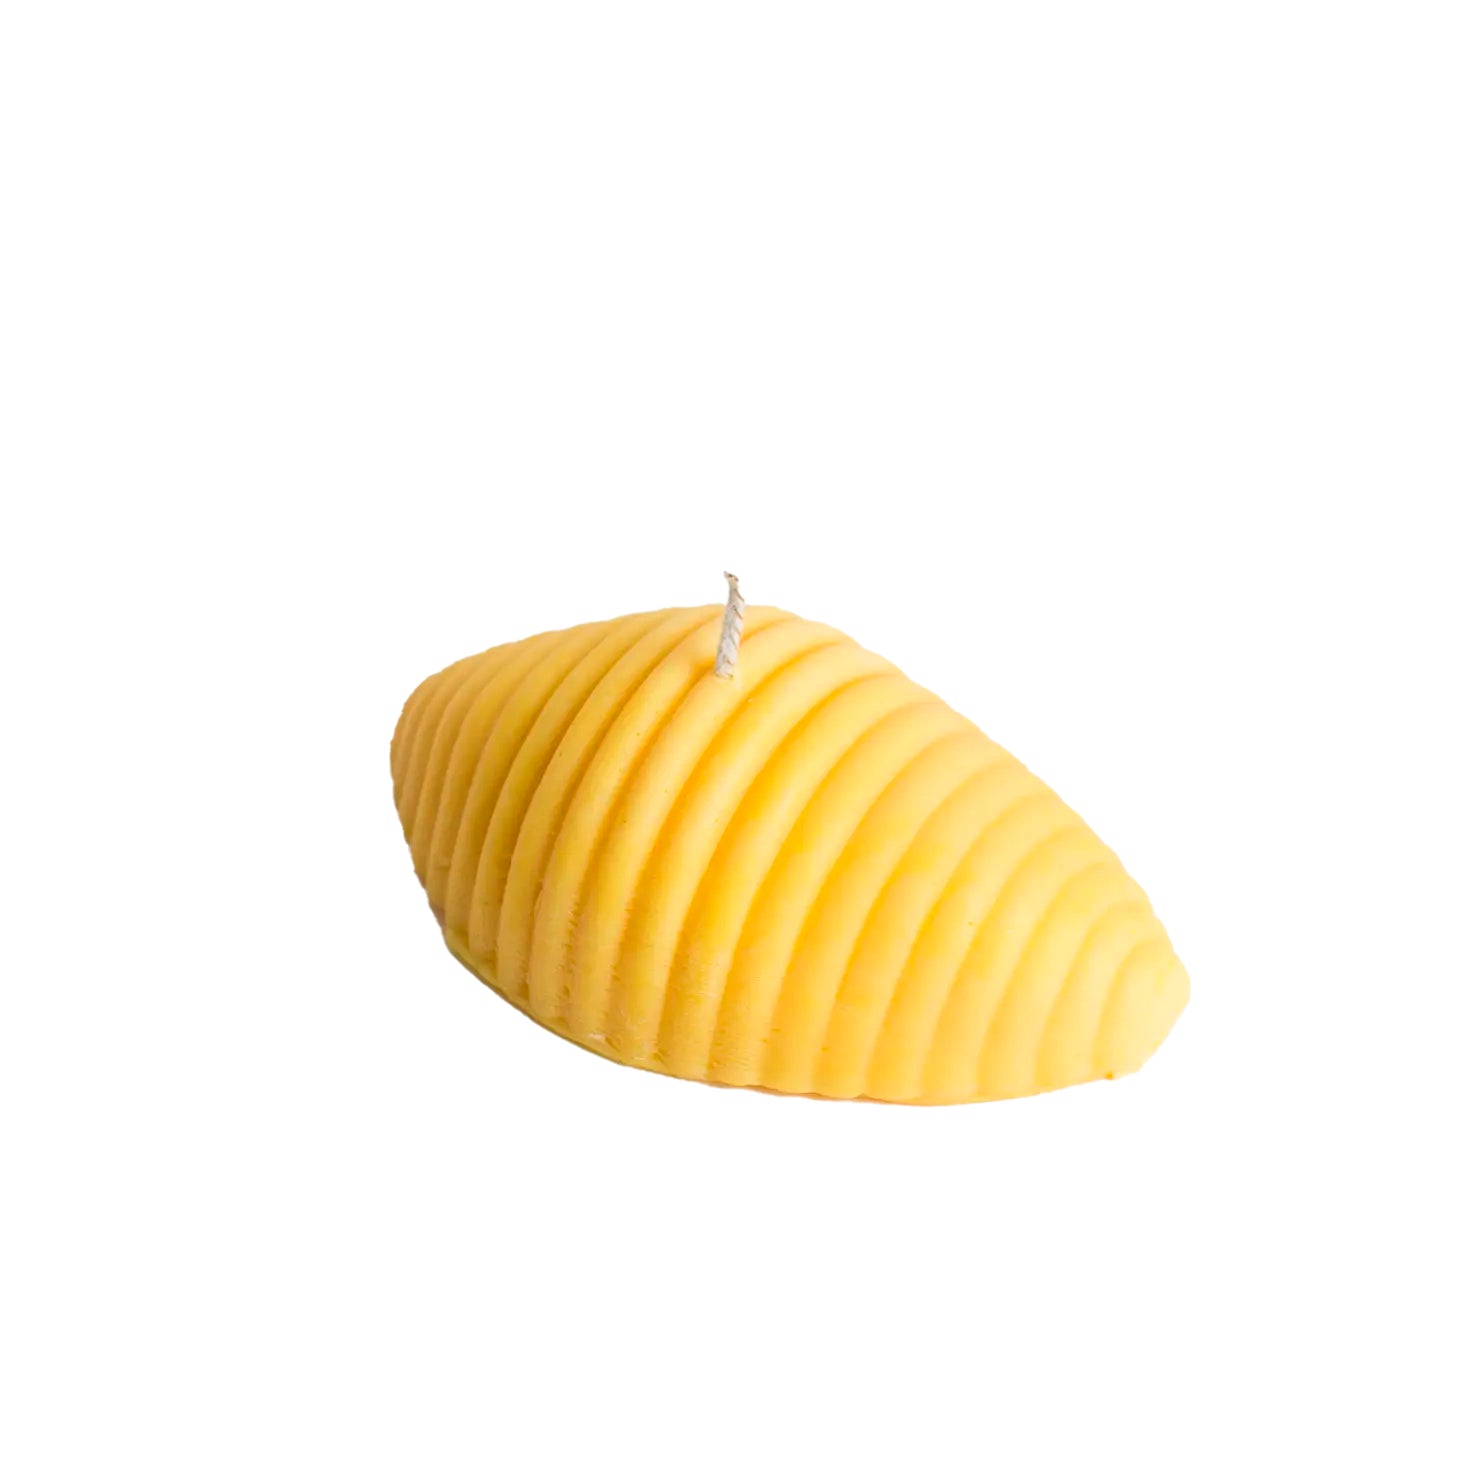 Absolute Conchiglie Candle